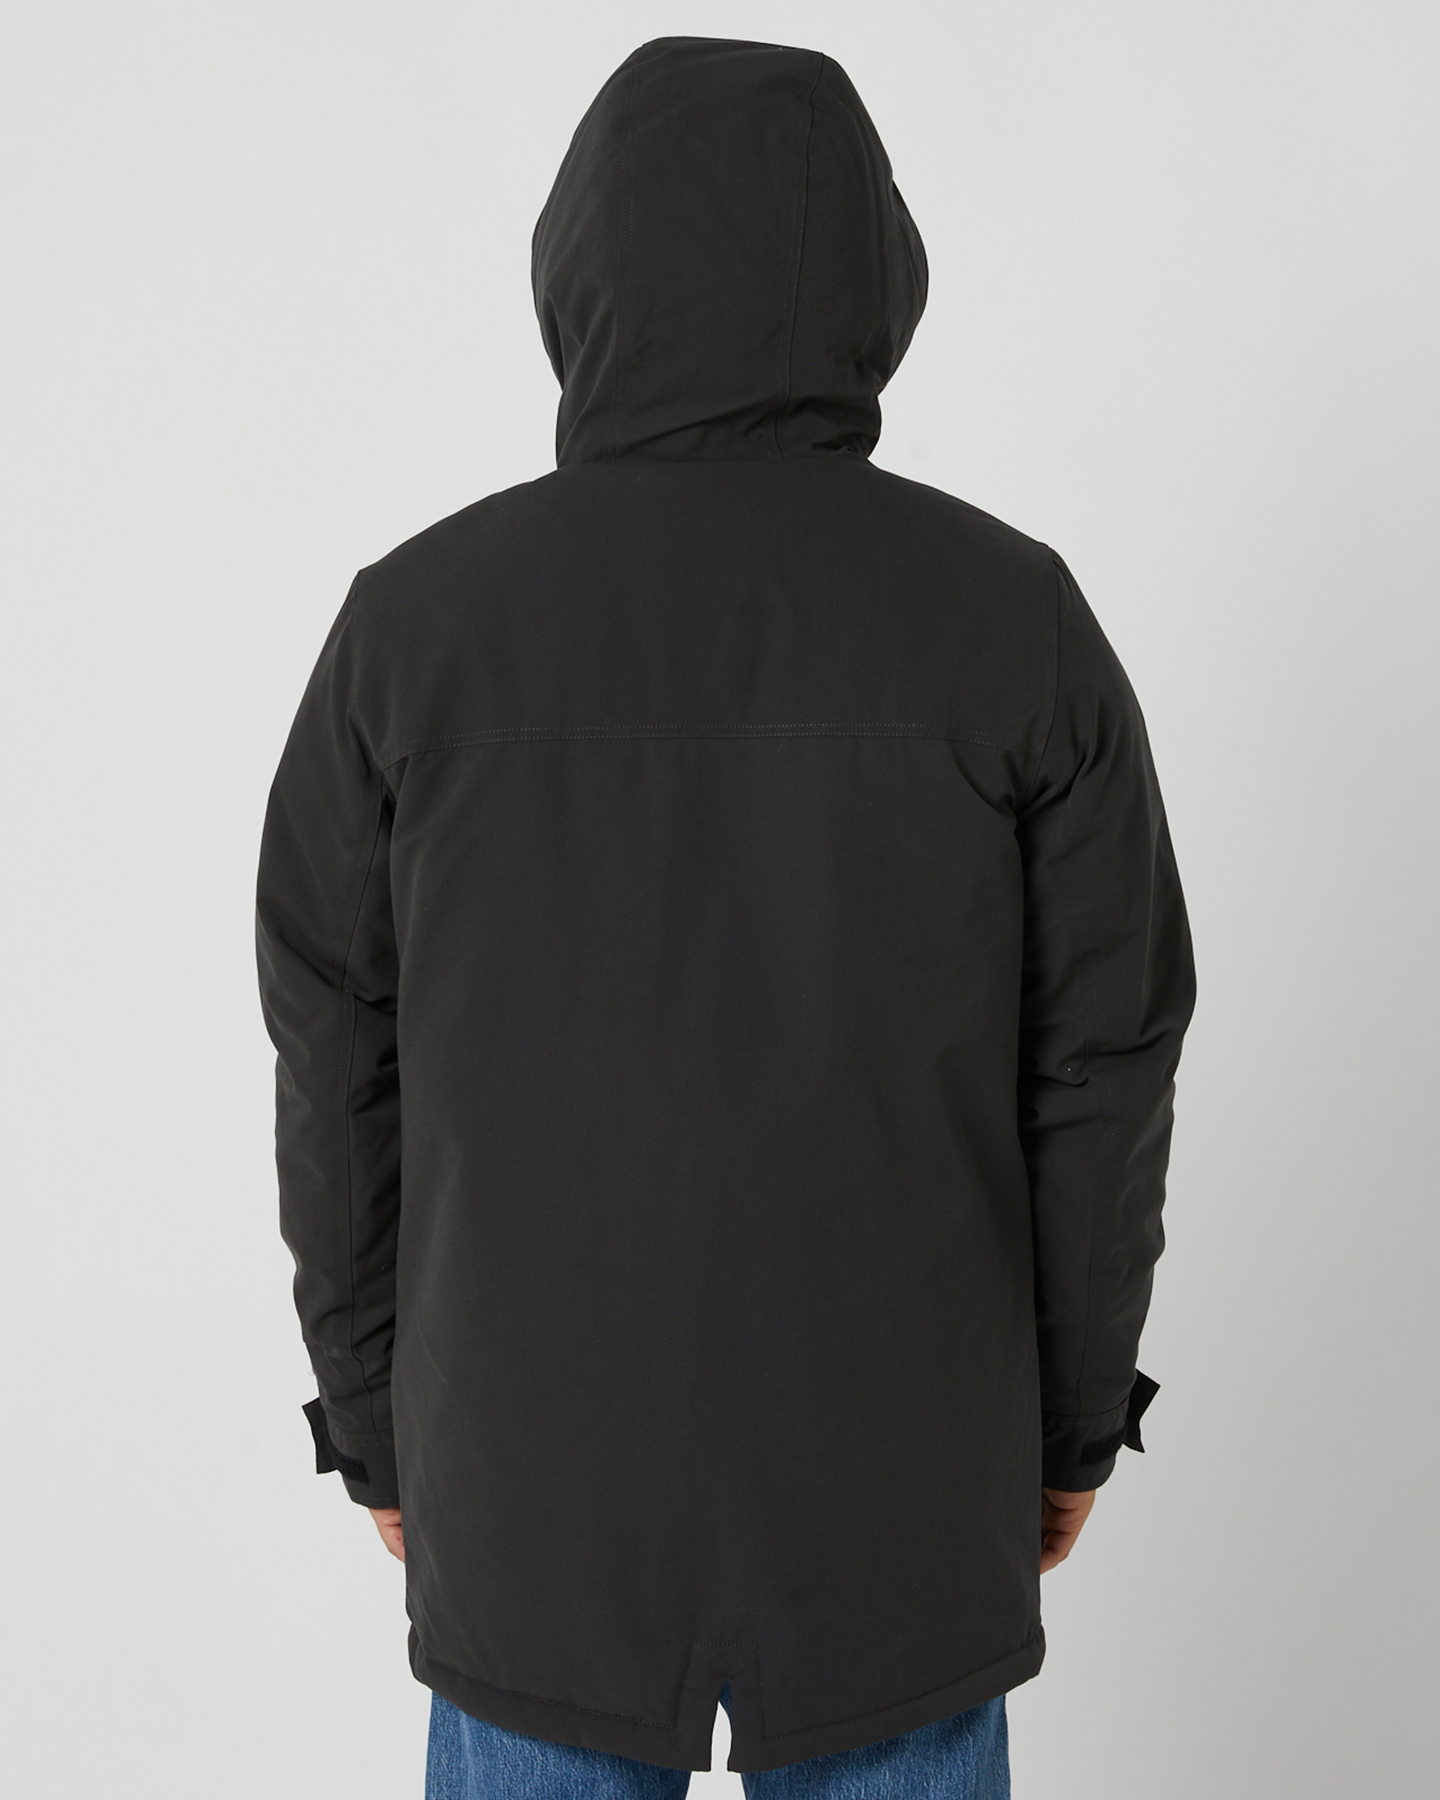 Rip Curl Anti Series Exit Jacket - Washed Black | SurfStitch